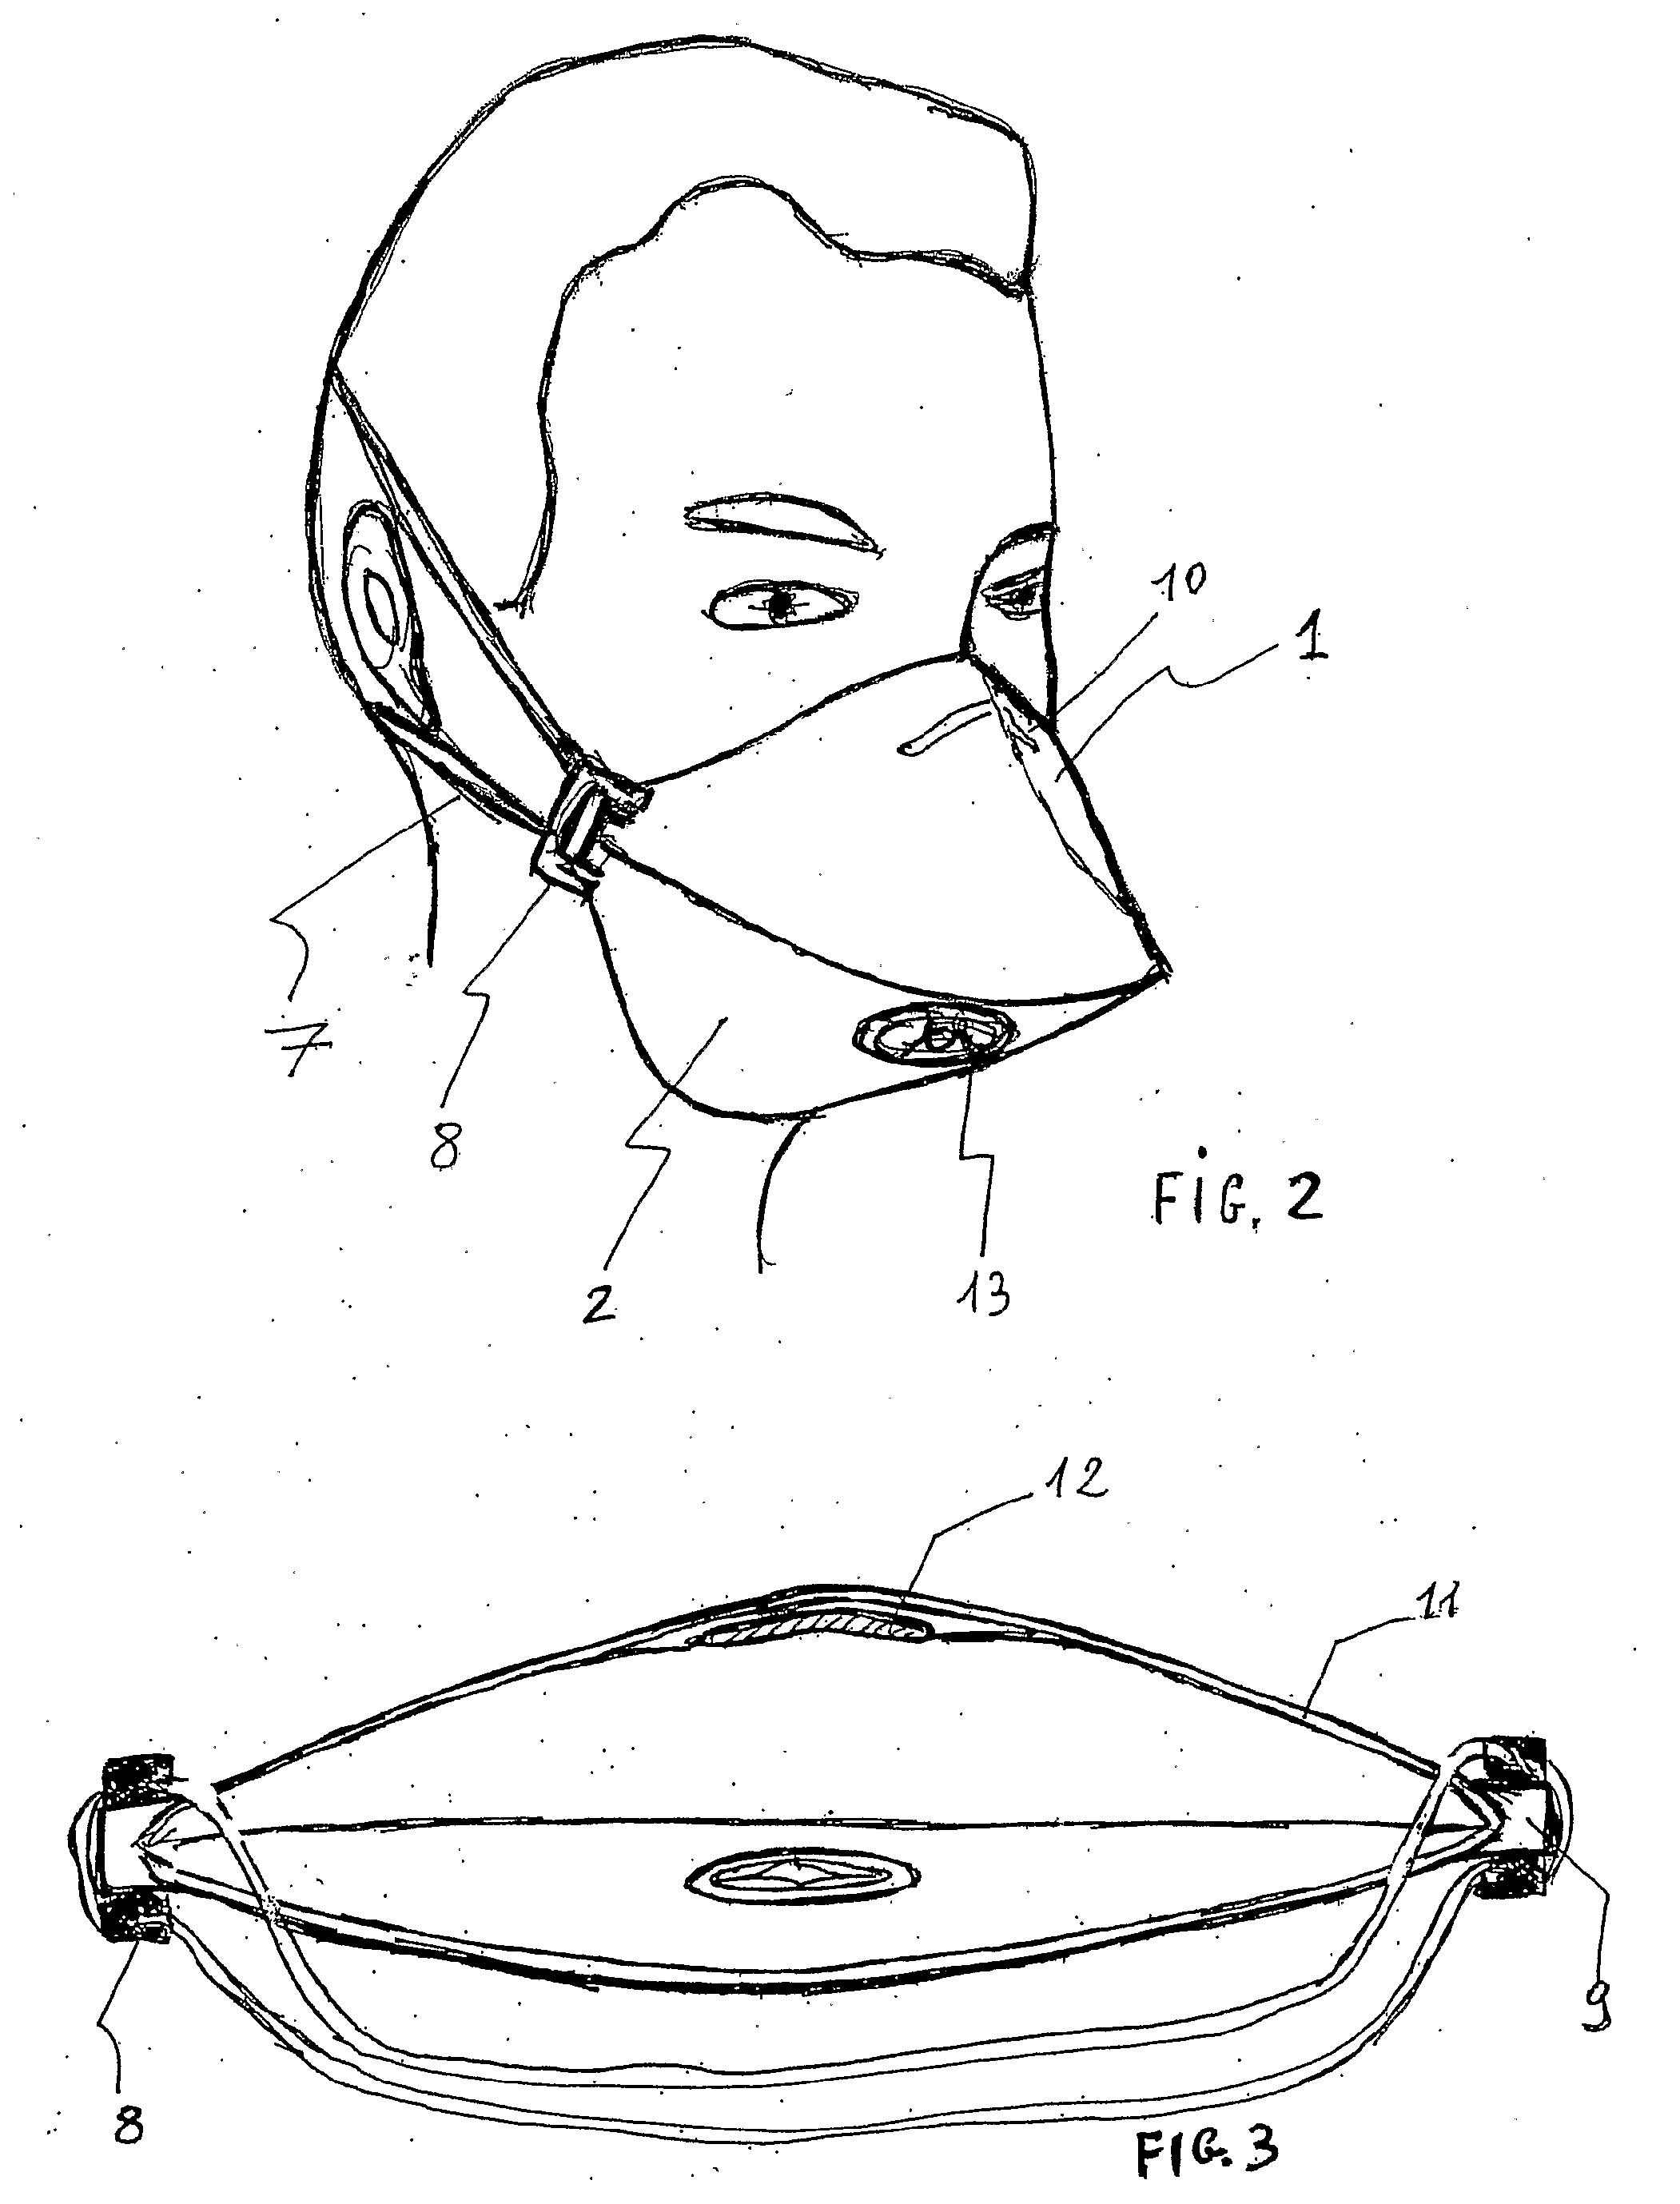 Protective mask against biological agents made of two parts